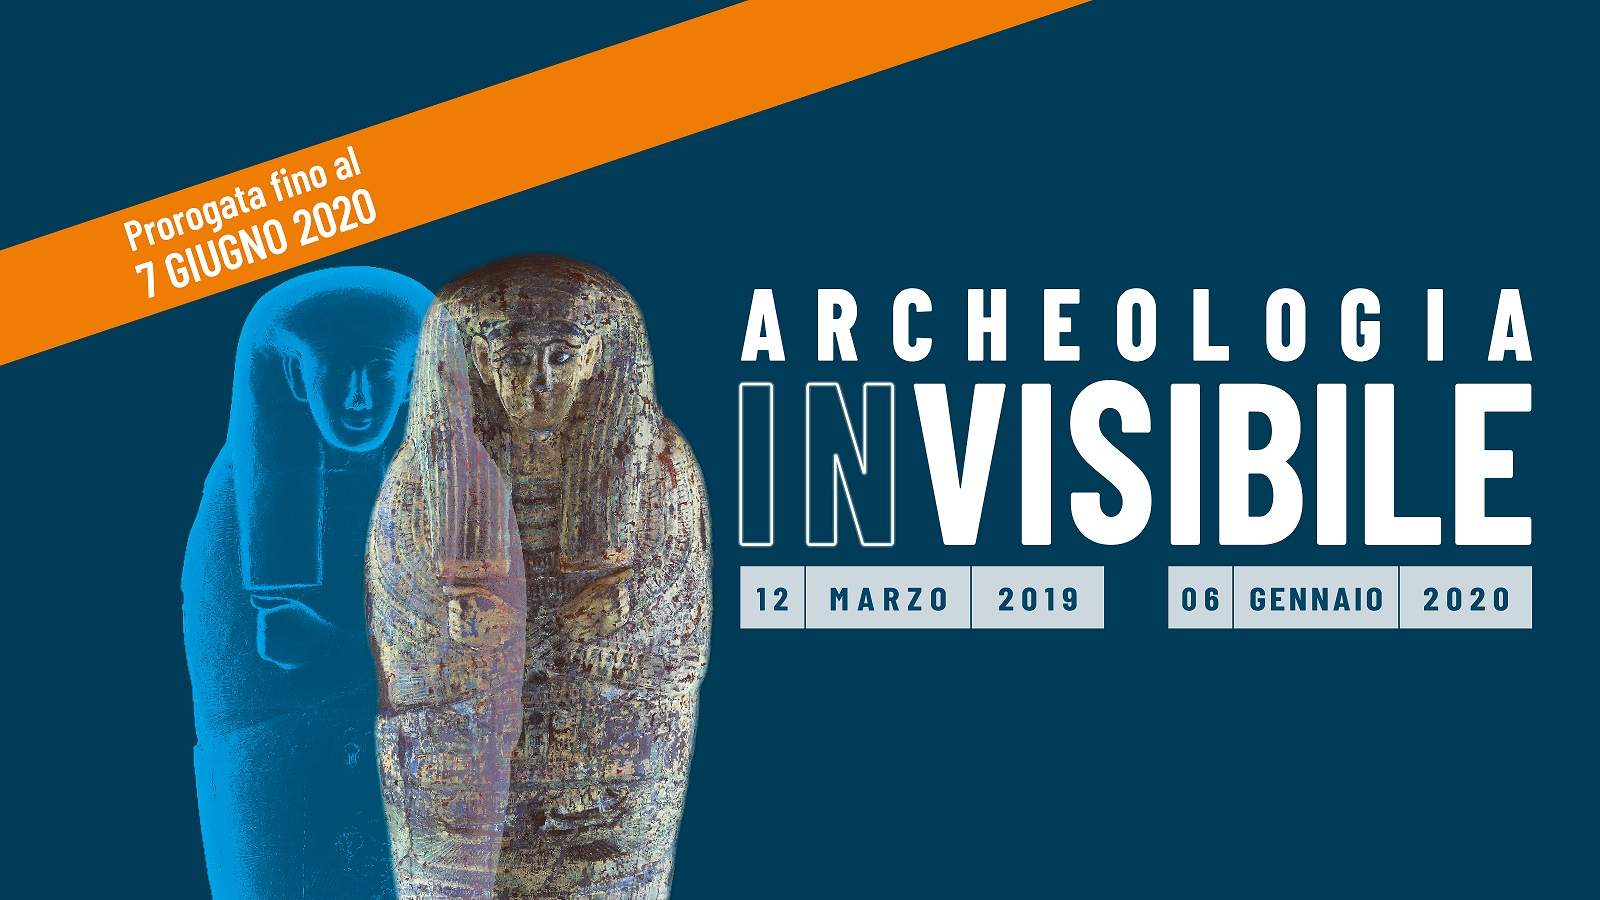 Invisible archaeology: the exhibition at the Egyptian Museum in Turin is on YouTube